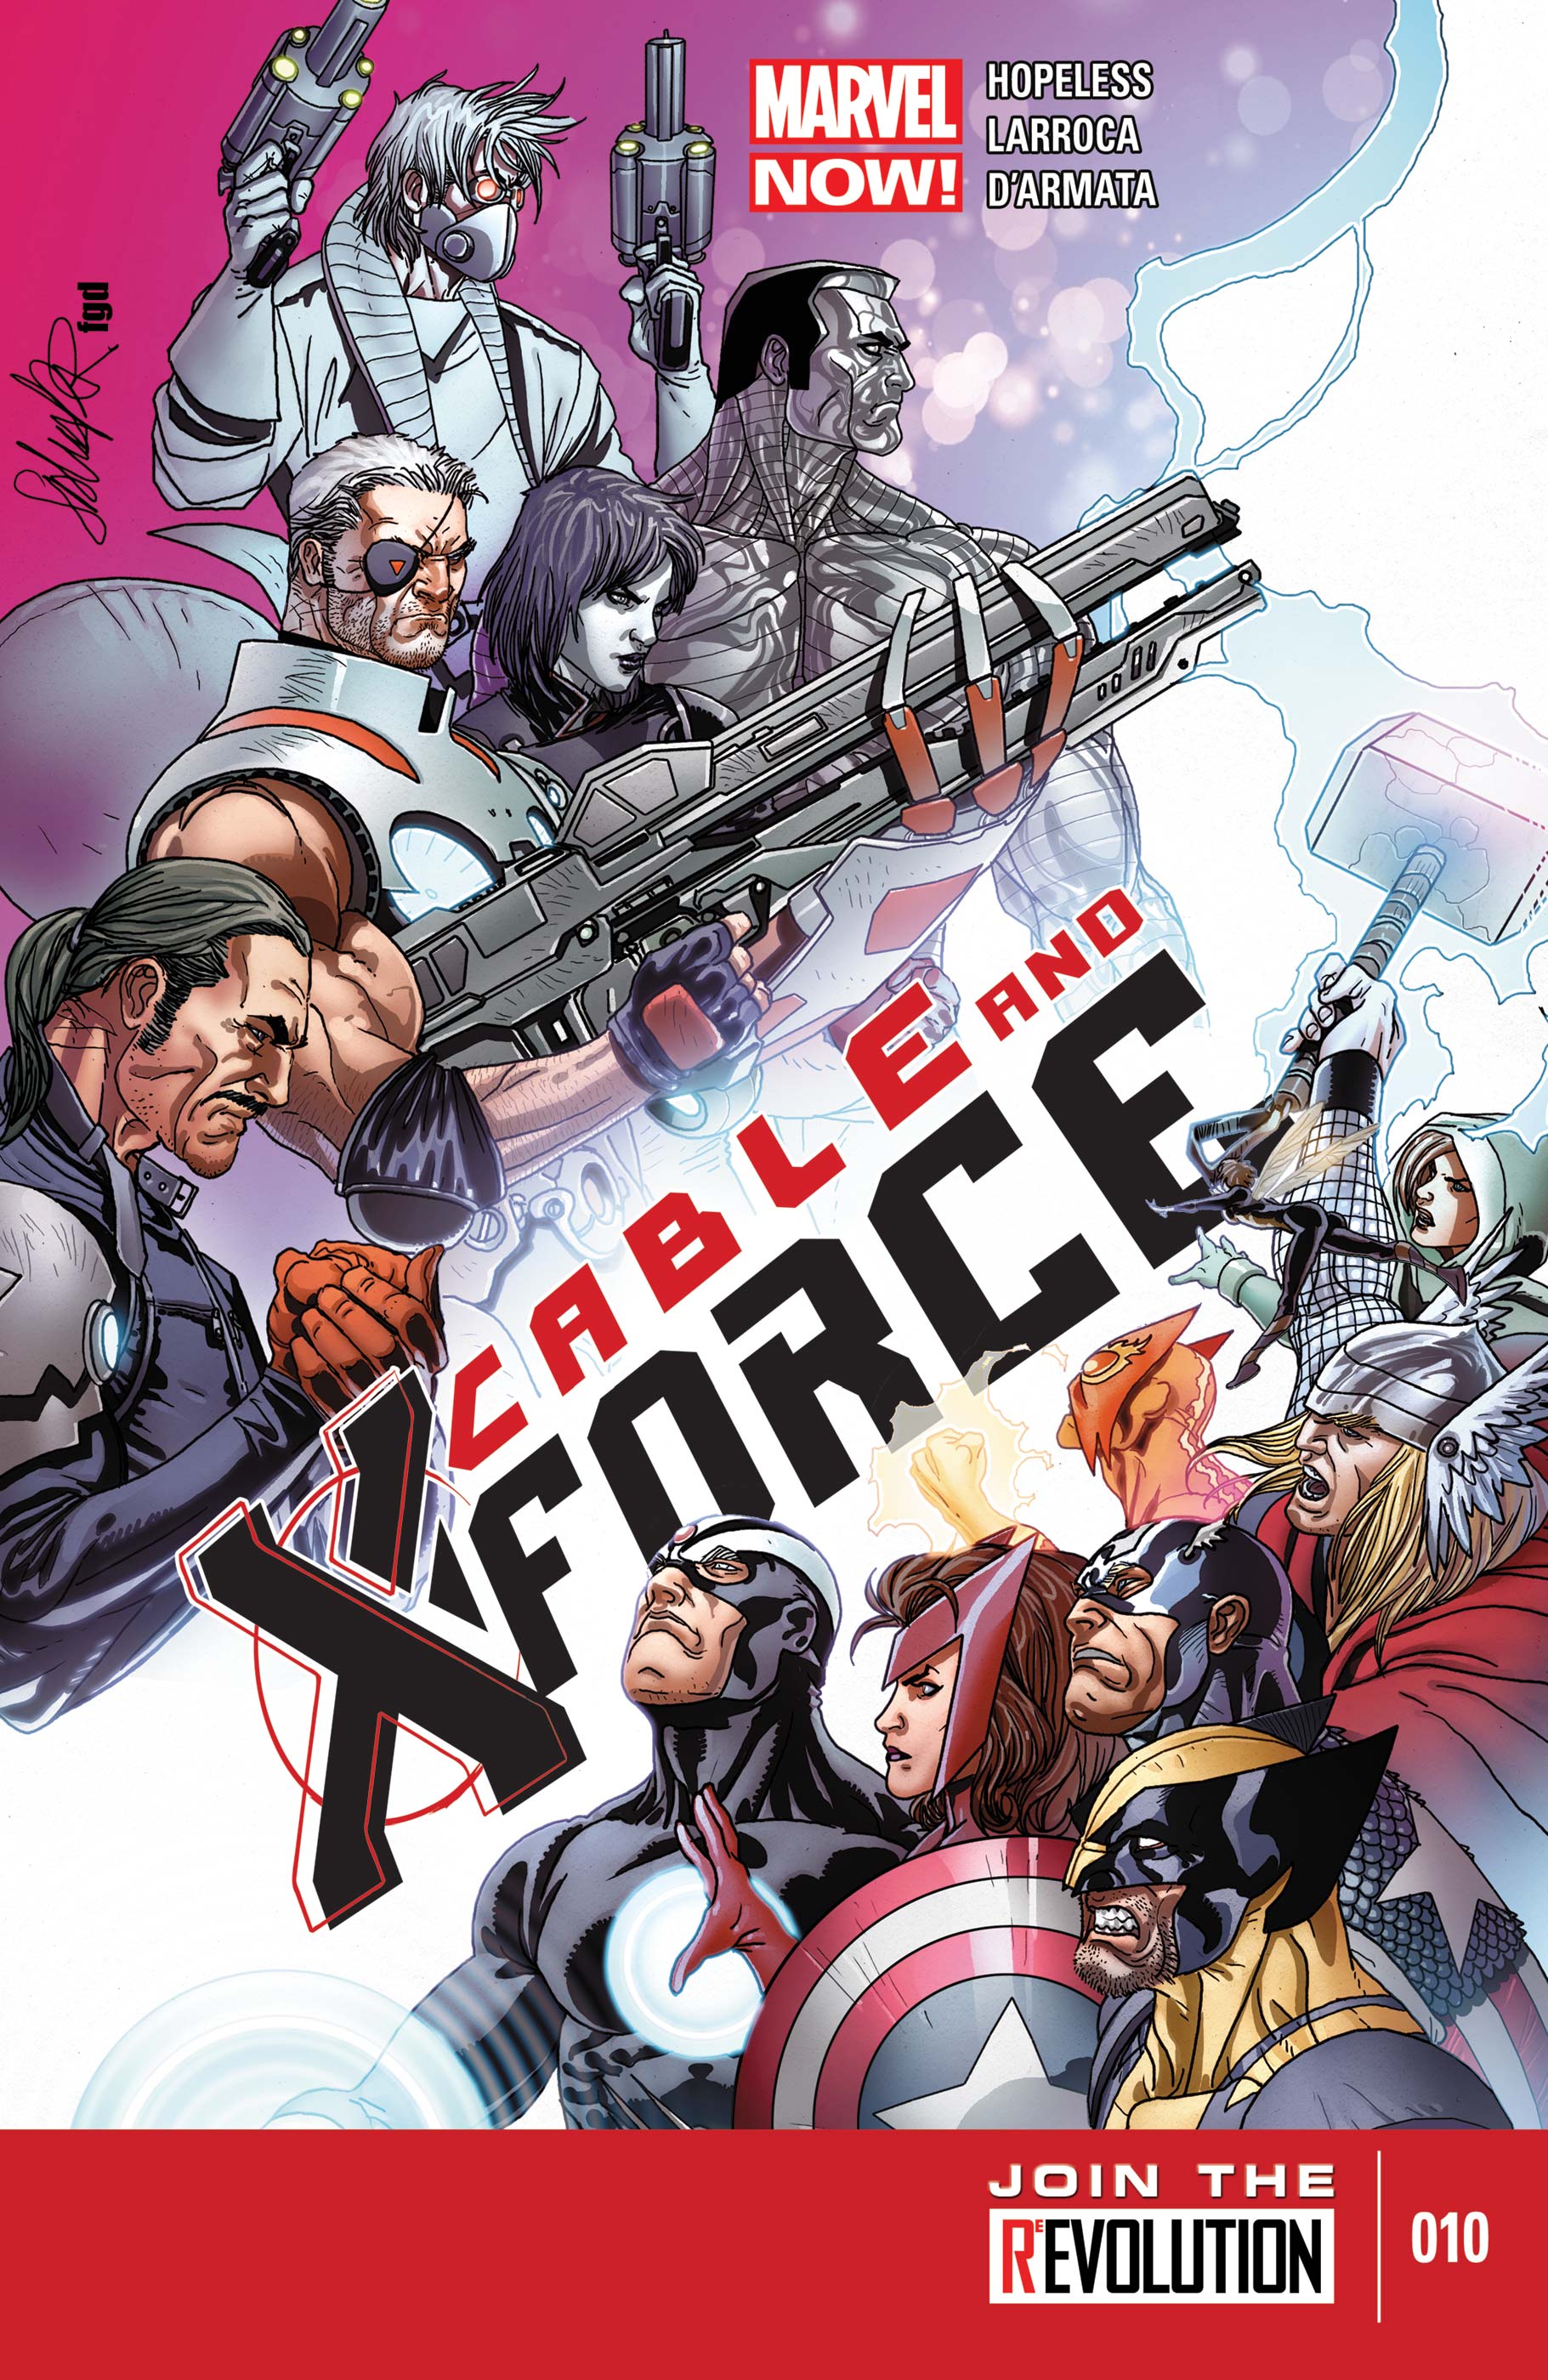 Cable and X-Force (2012) #10